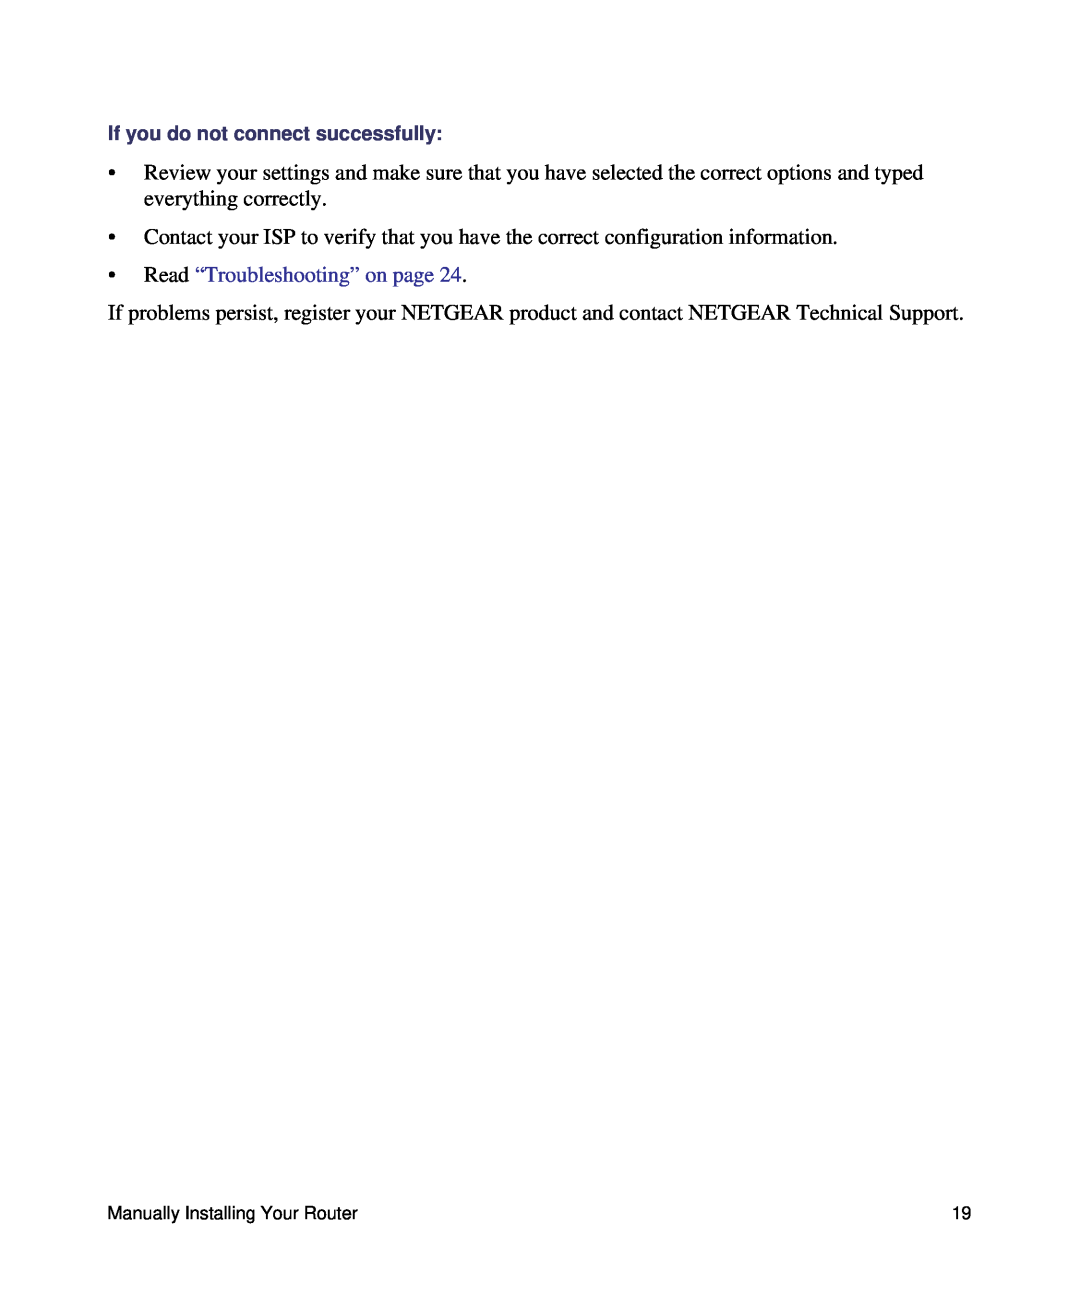 NETGEAR N150, WNR1000 manual Read “Troubleshooting” on page, If you do not connect successfully 